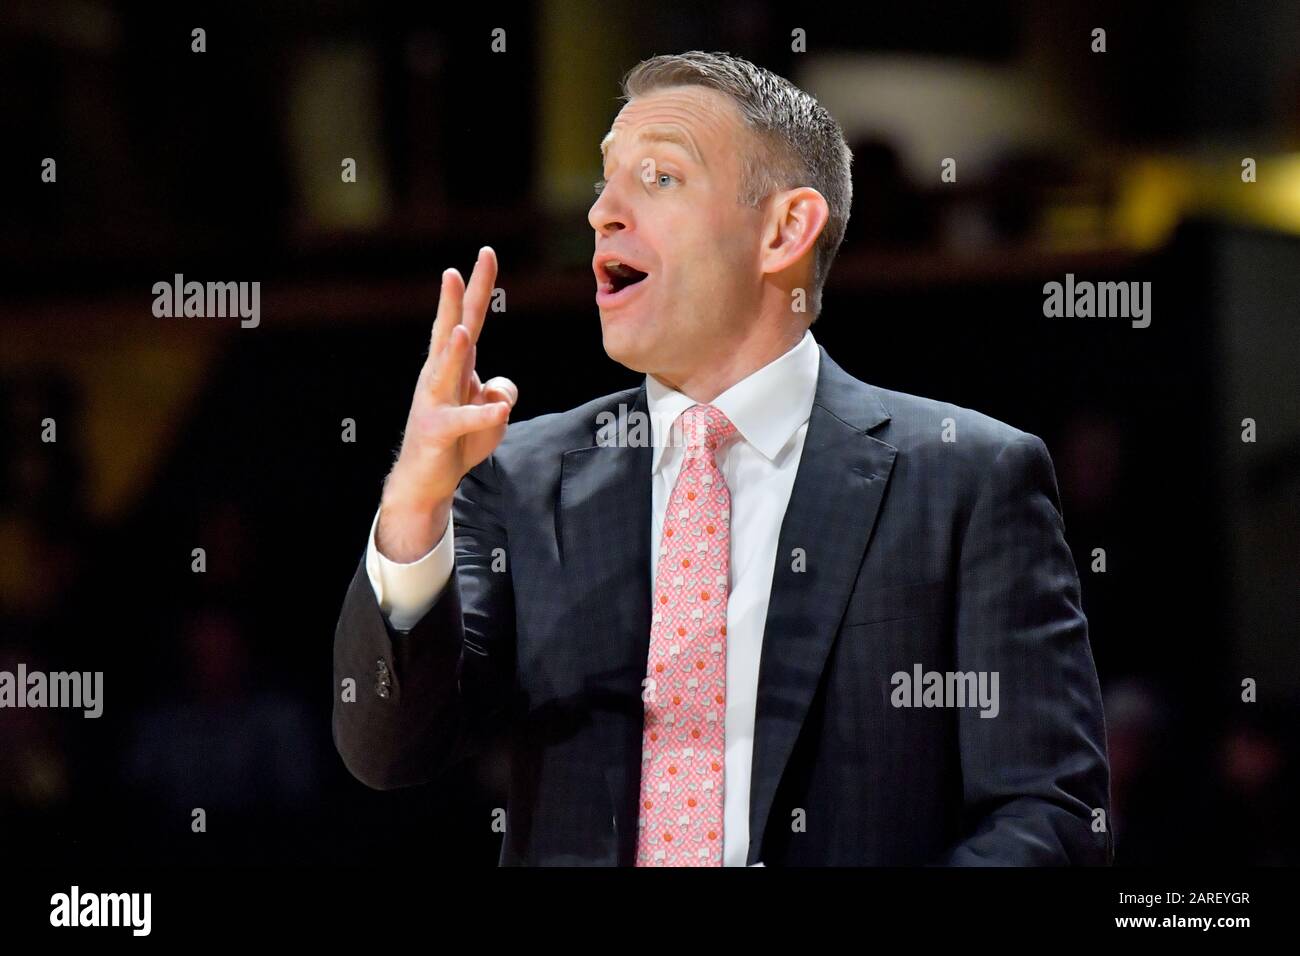 Alabama Crimson Tide head coach Nate Oats during the second half against the Vanderbilt Commodores of an NCAA SEC basketball game at Memorial Gym. Alabama won 77-62. Wednesday, Jan 22, 2020, in Nashville. Alabama defeated Vanderbilt 77-62. (Photo by IOS/ESPA-Images) Stock Photo